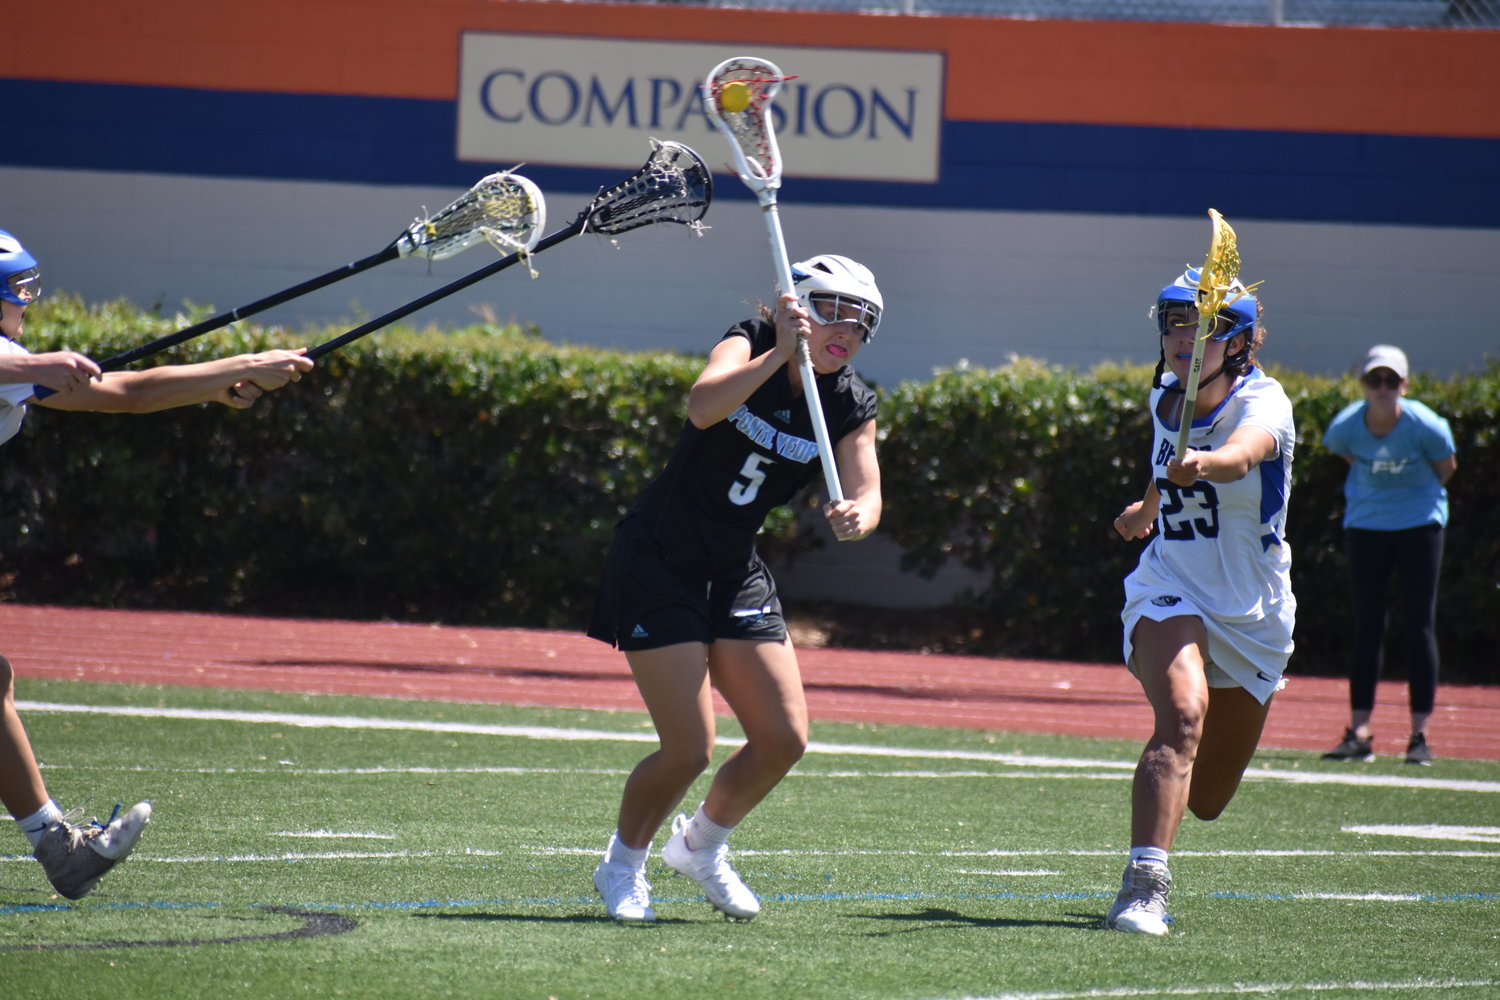 Lily Mosser fires a shot on goal between a trio of converging Bartram Trail defenders during the Second Annual Rivalry on the River Lacrosse Tournament hosted by The Bolles School March 26.